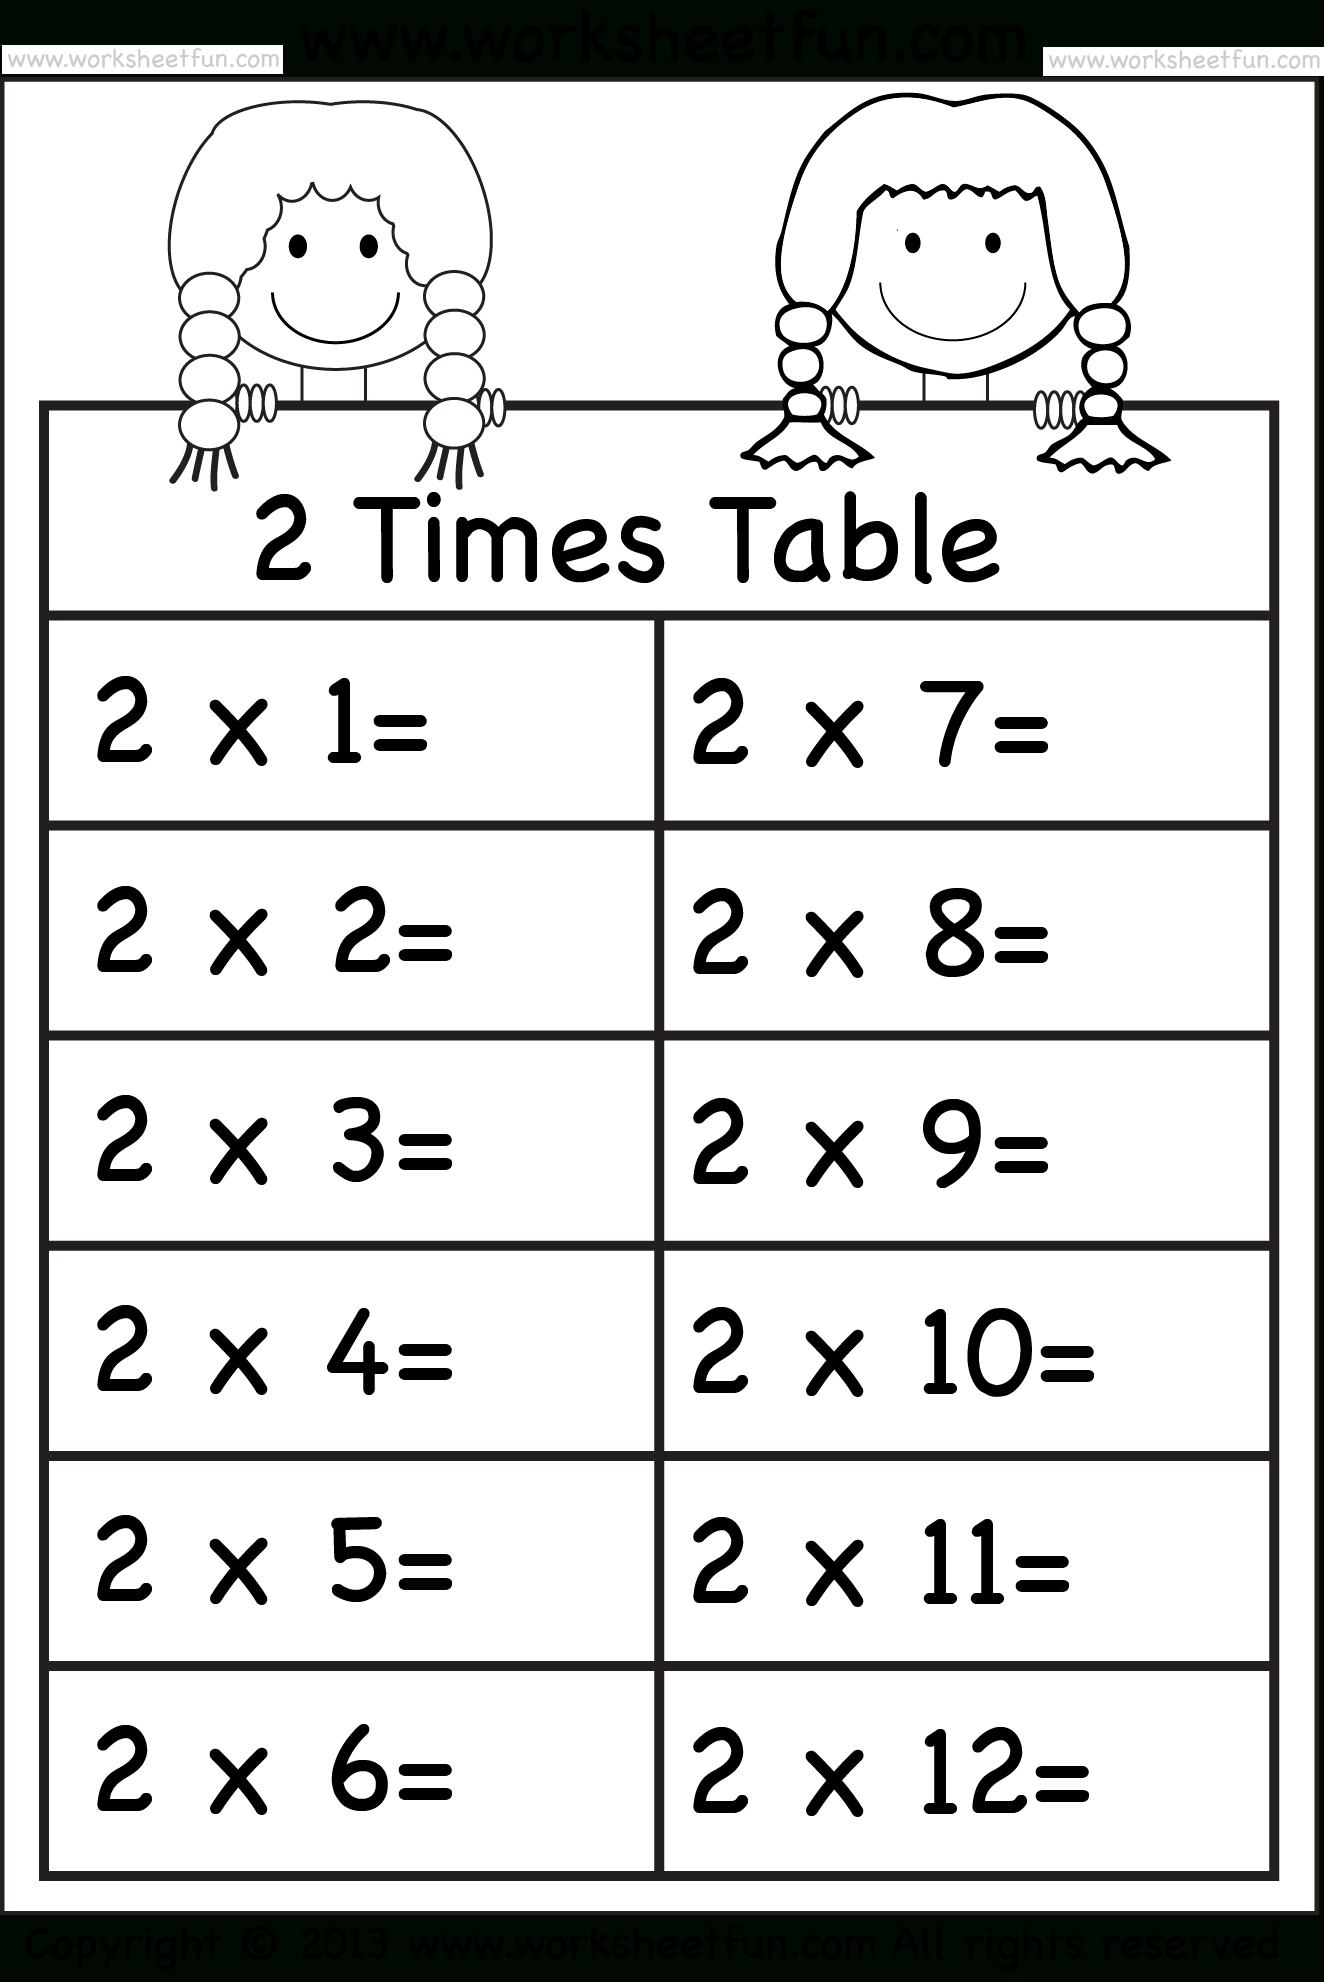 Times Tables Worksheets – 2, 3, 4, 5, 6, 7, 8, 9, 10, 11 And 12 | Free Printable 2 Times Tables Worksheets